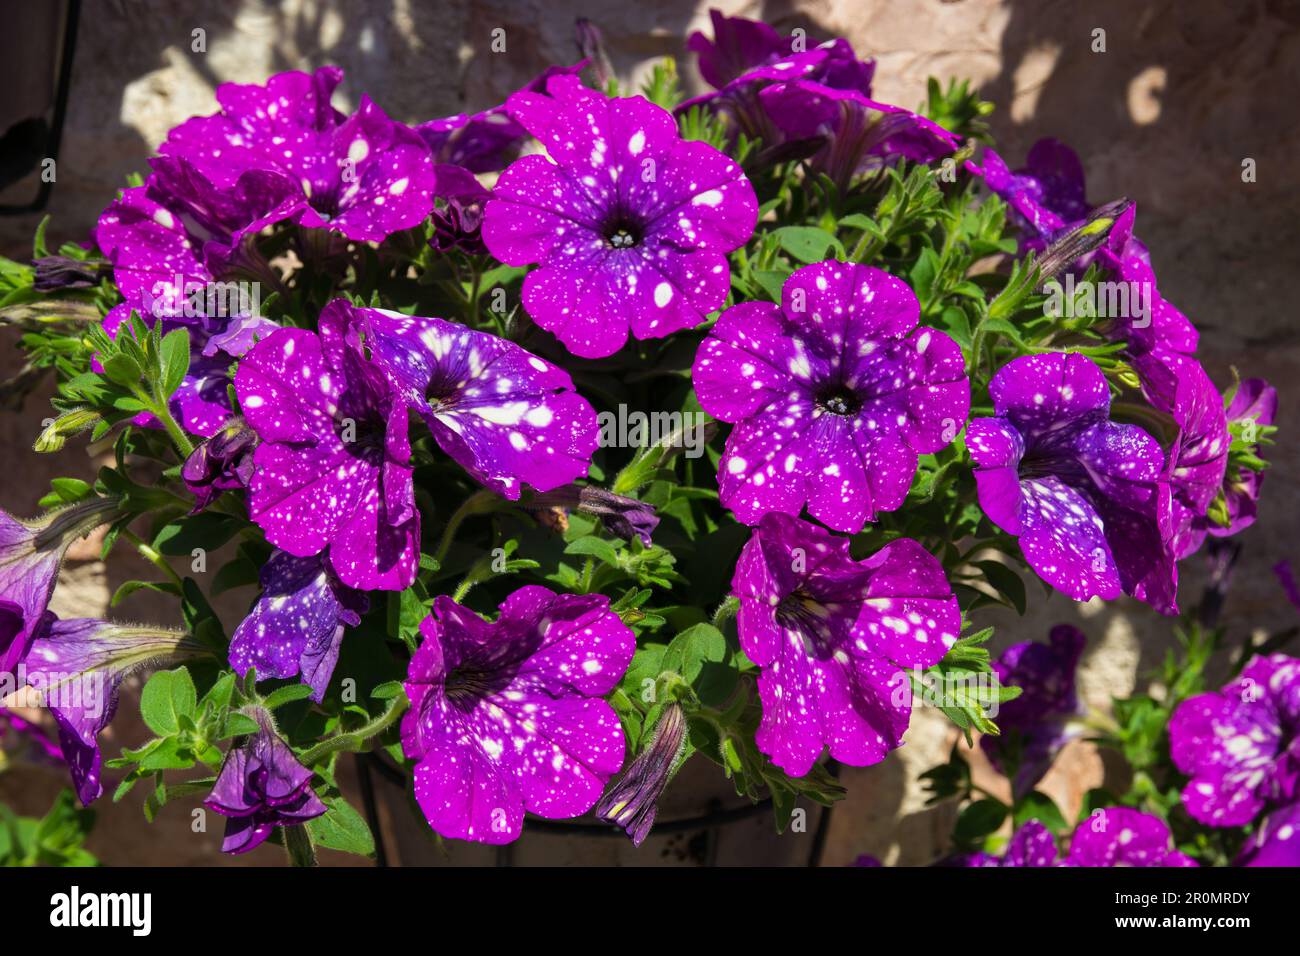 Close up of violet spotted flowers of petunias Night sky or Starry night, among fleecy pubescent dark green foliage Stock Photo